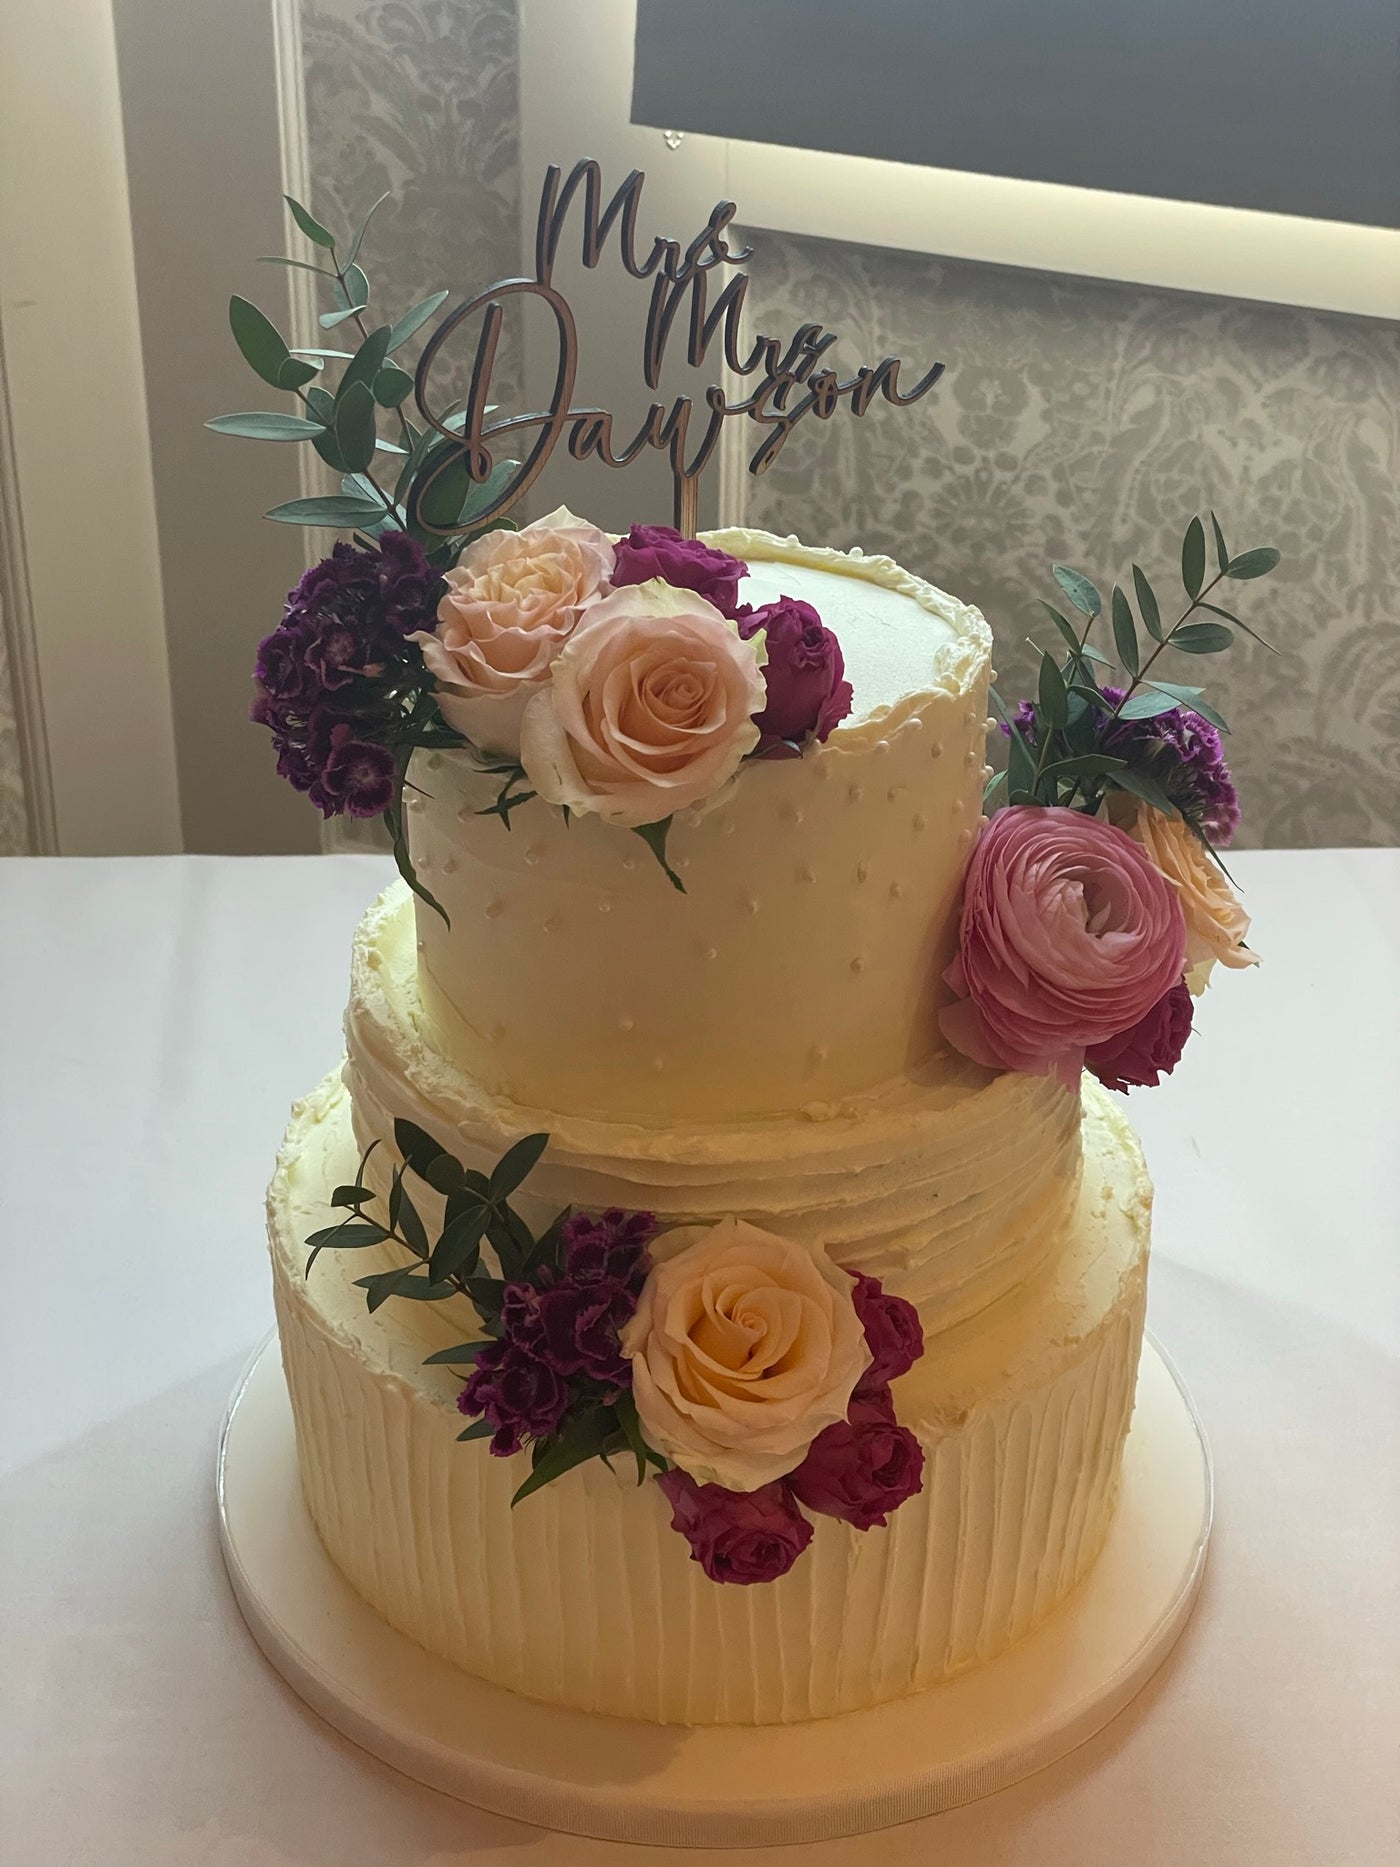 Rustic buttercream design with fresh flowers